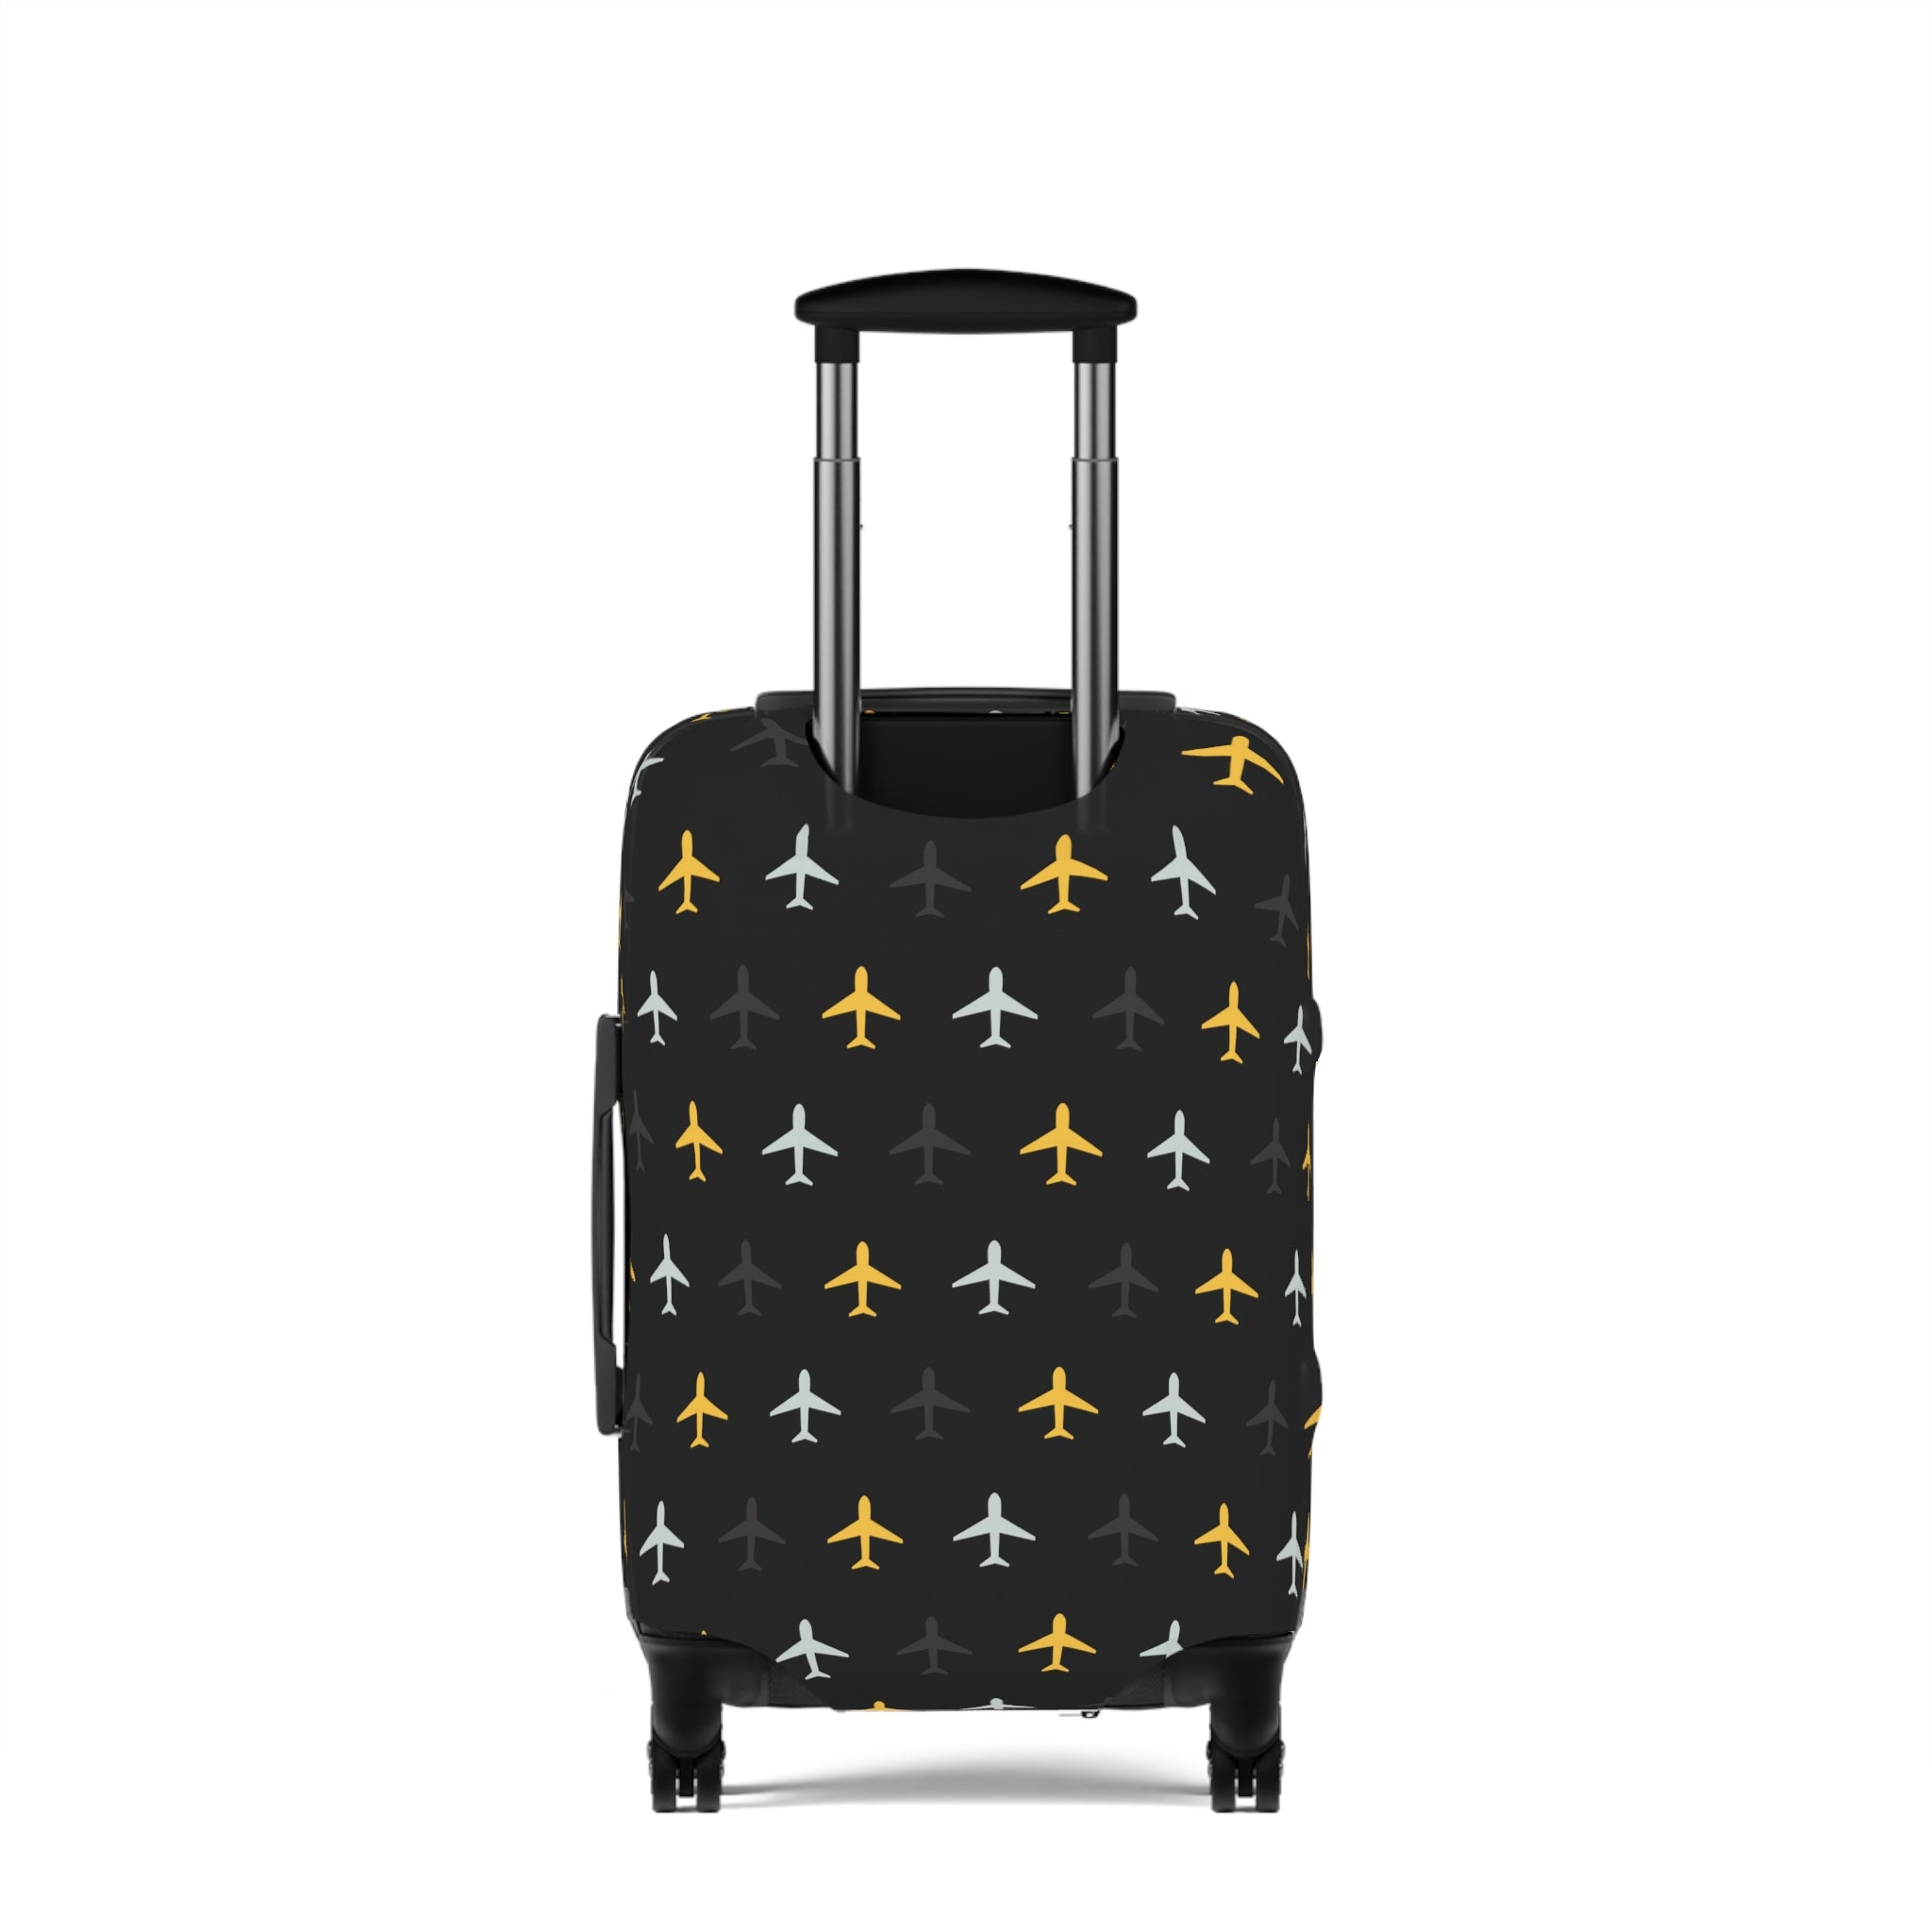 Planes Luggage Cover (Black)